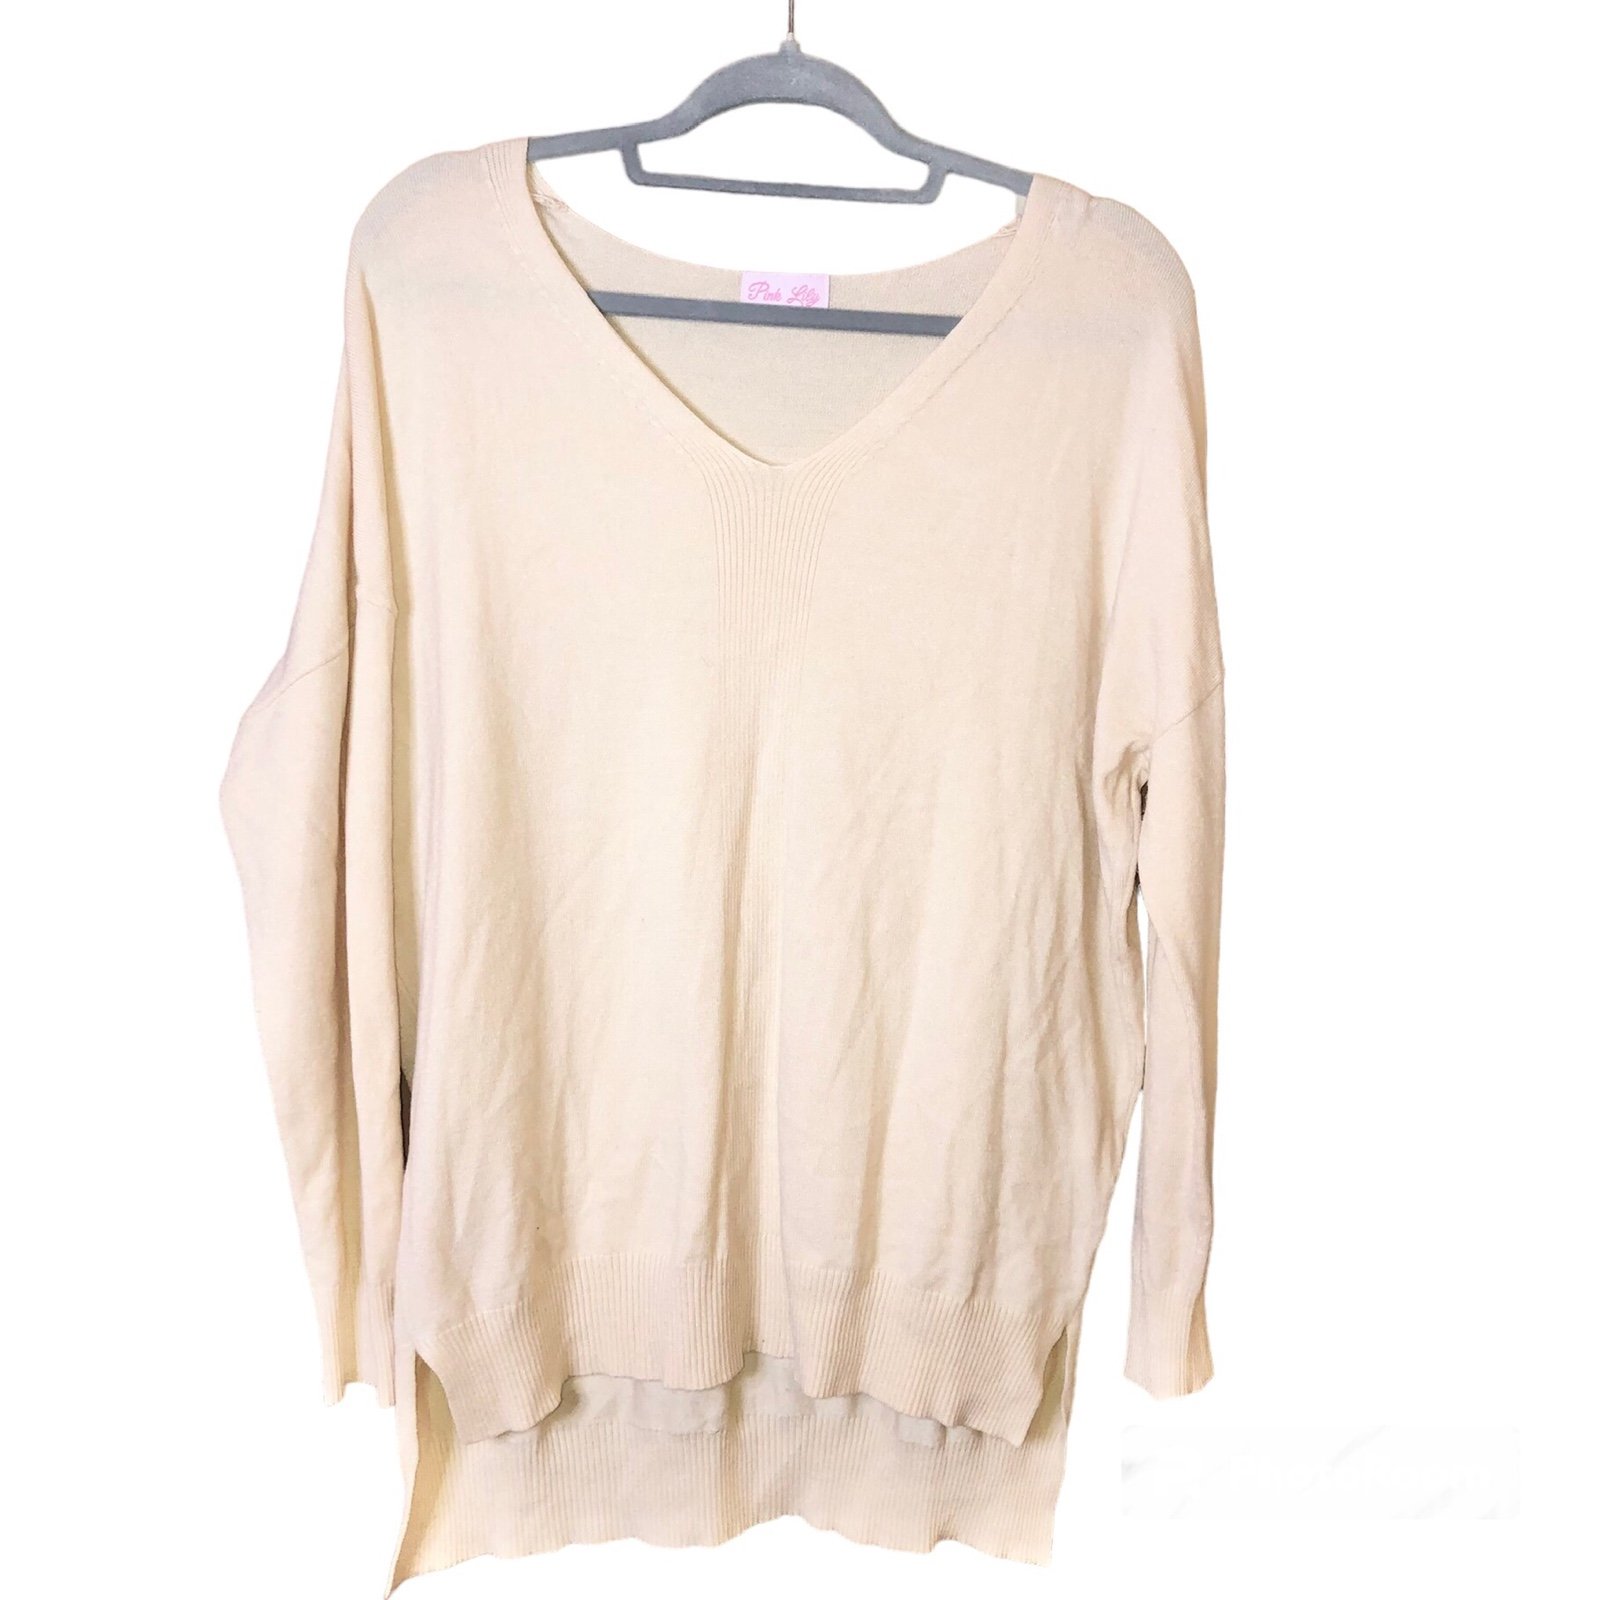 Wholesale price Pink lily V Neck High Low Dolman Sweate